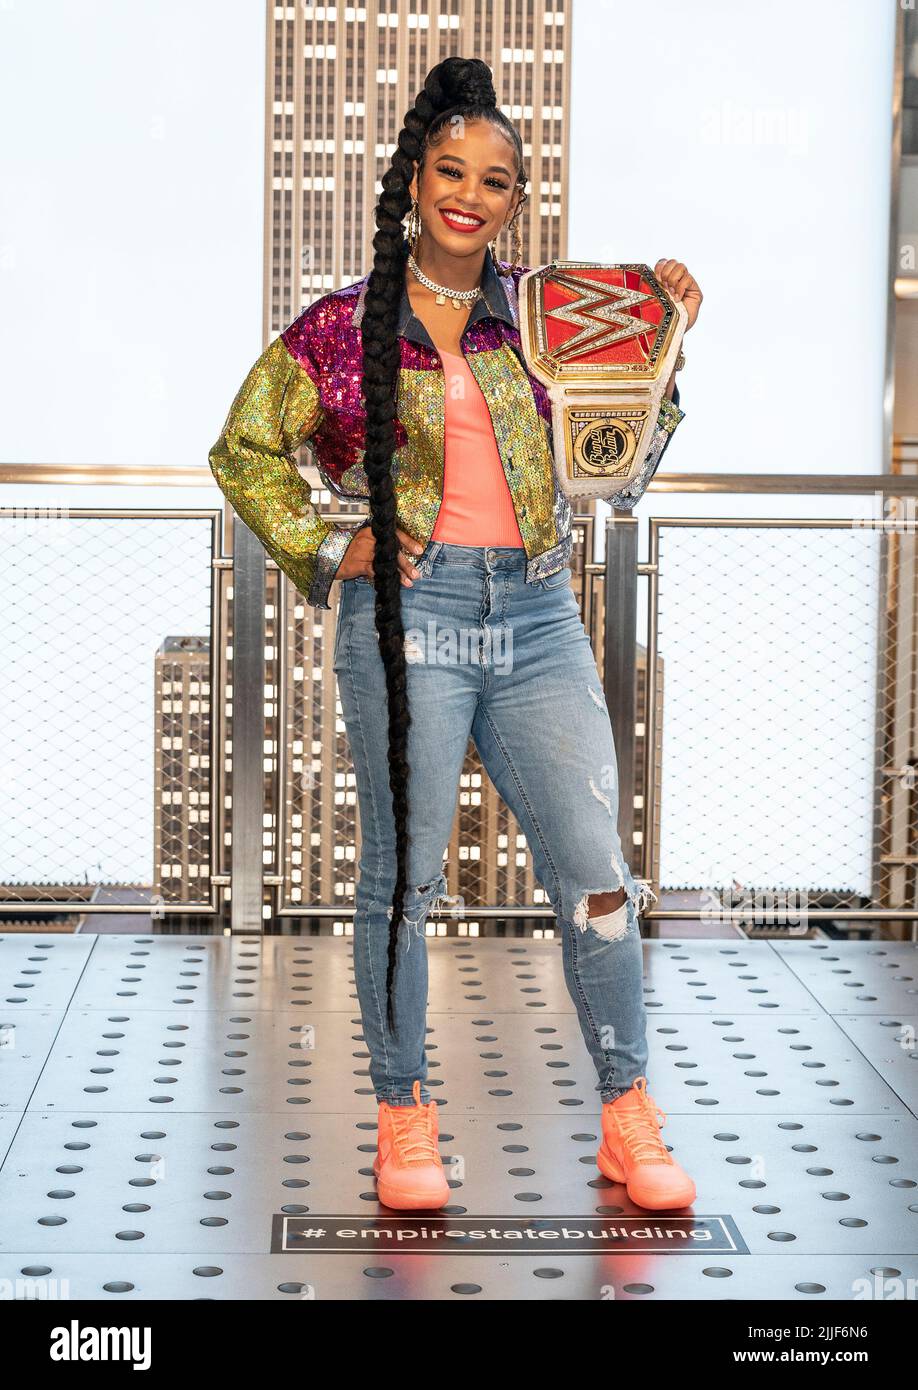 New York, USA. 25th July, 2022. WWE Raw Women's Champion Bianca Belair poses on grand staircase during visit to Empire State Building in New York on July 25 2022. (Photo by Lev Radin/Sipa USA) Credit: Sipa USA/Alamy Live News Stock Photo